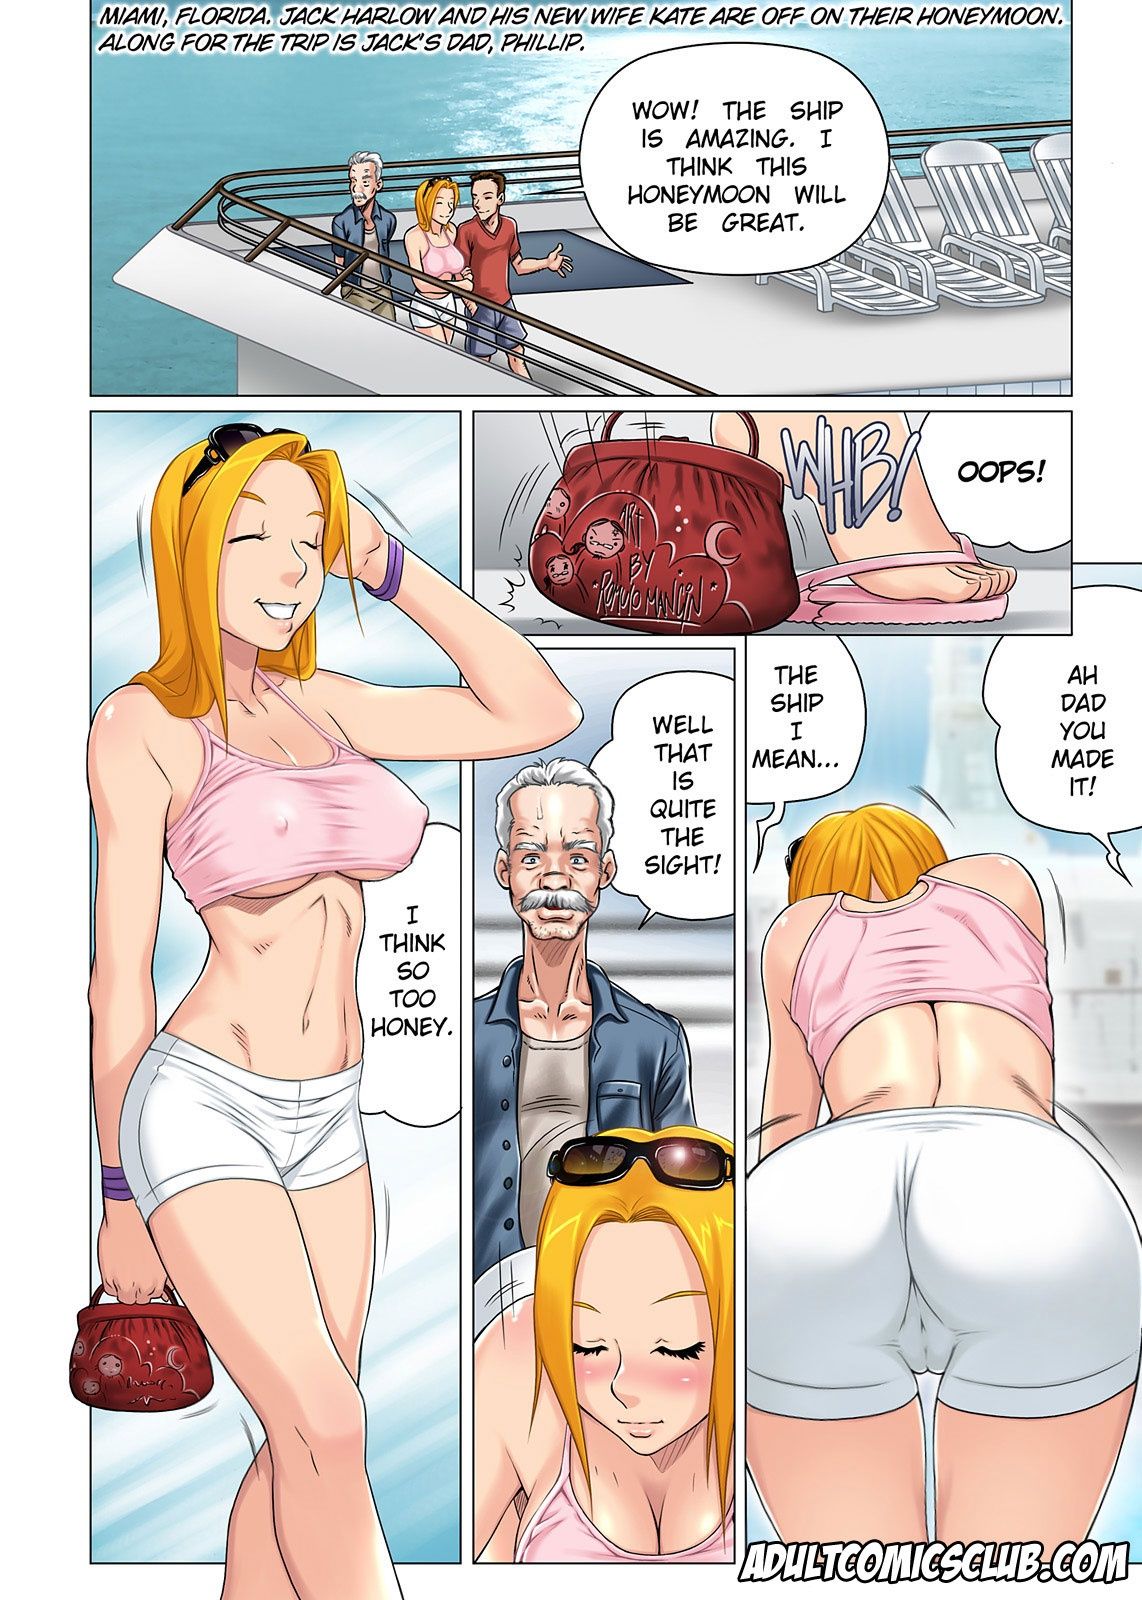 Melkor Mancin - Another Horny Father In Law Porn Comics.